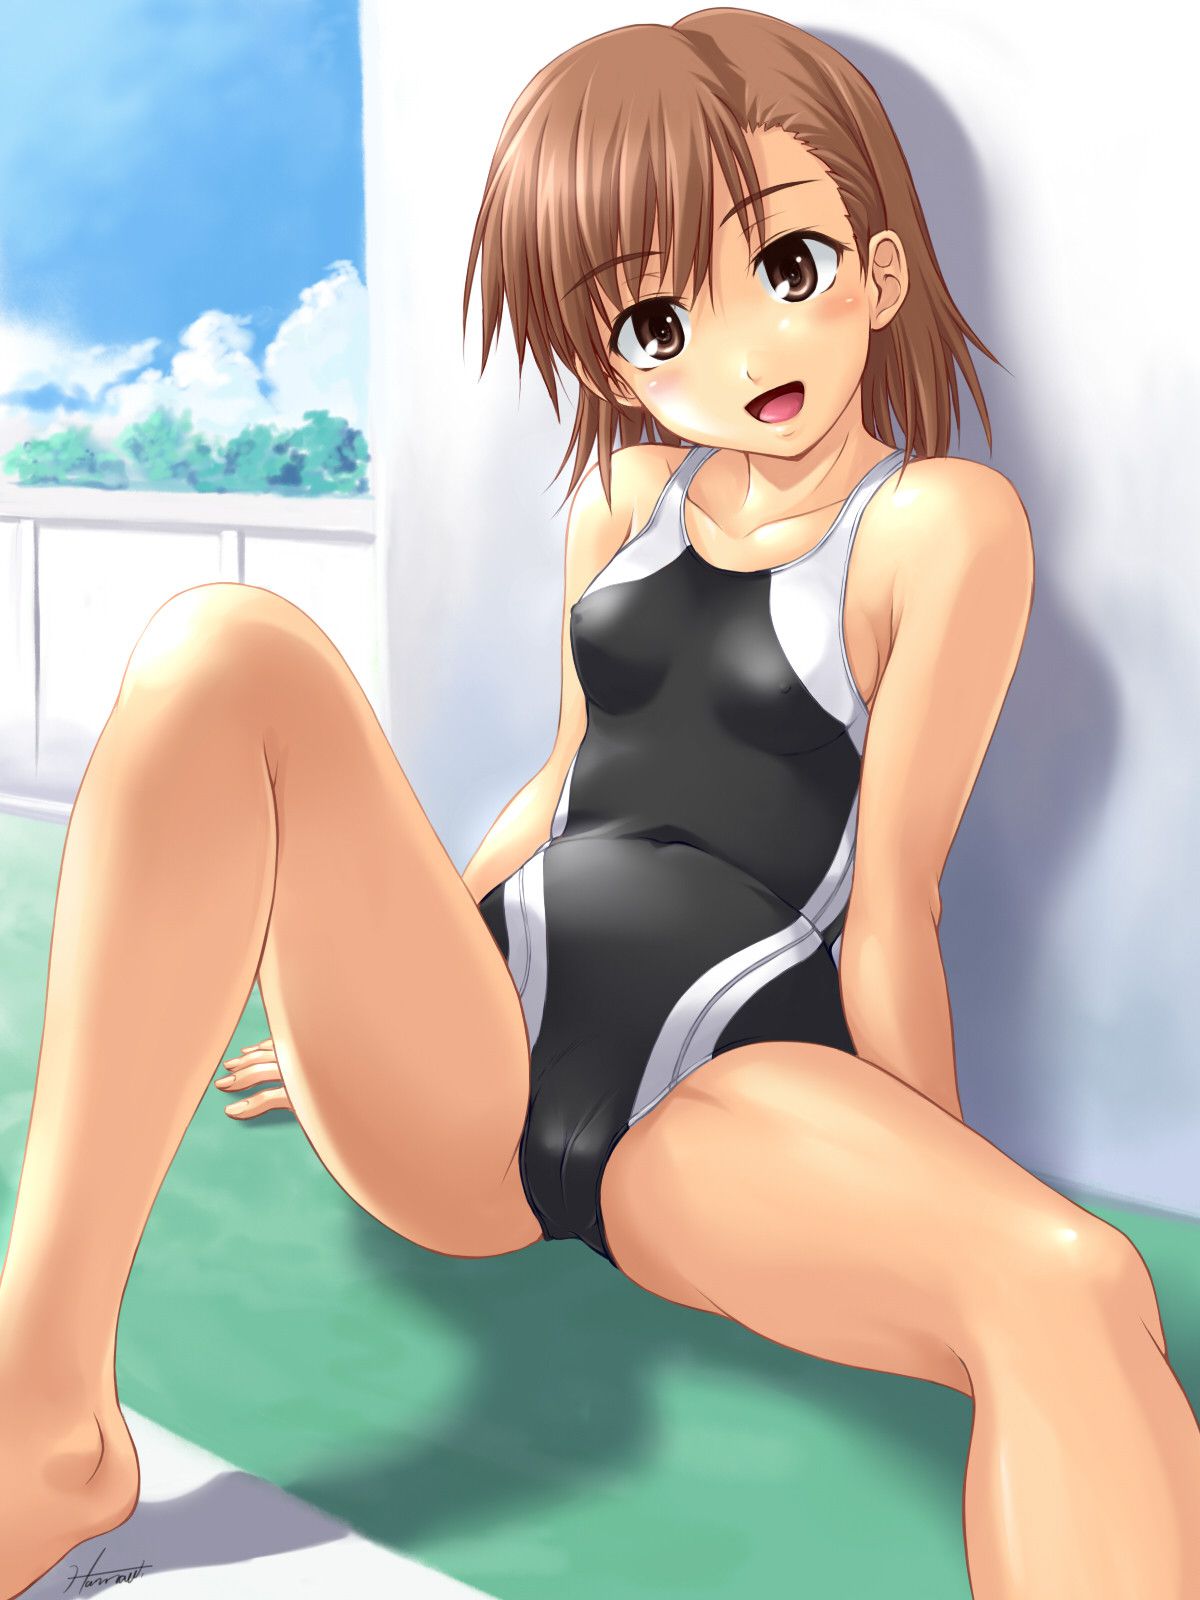 Swimsuit hentai pictures! 8